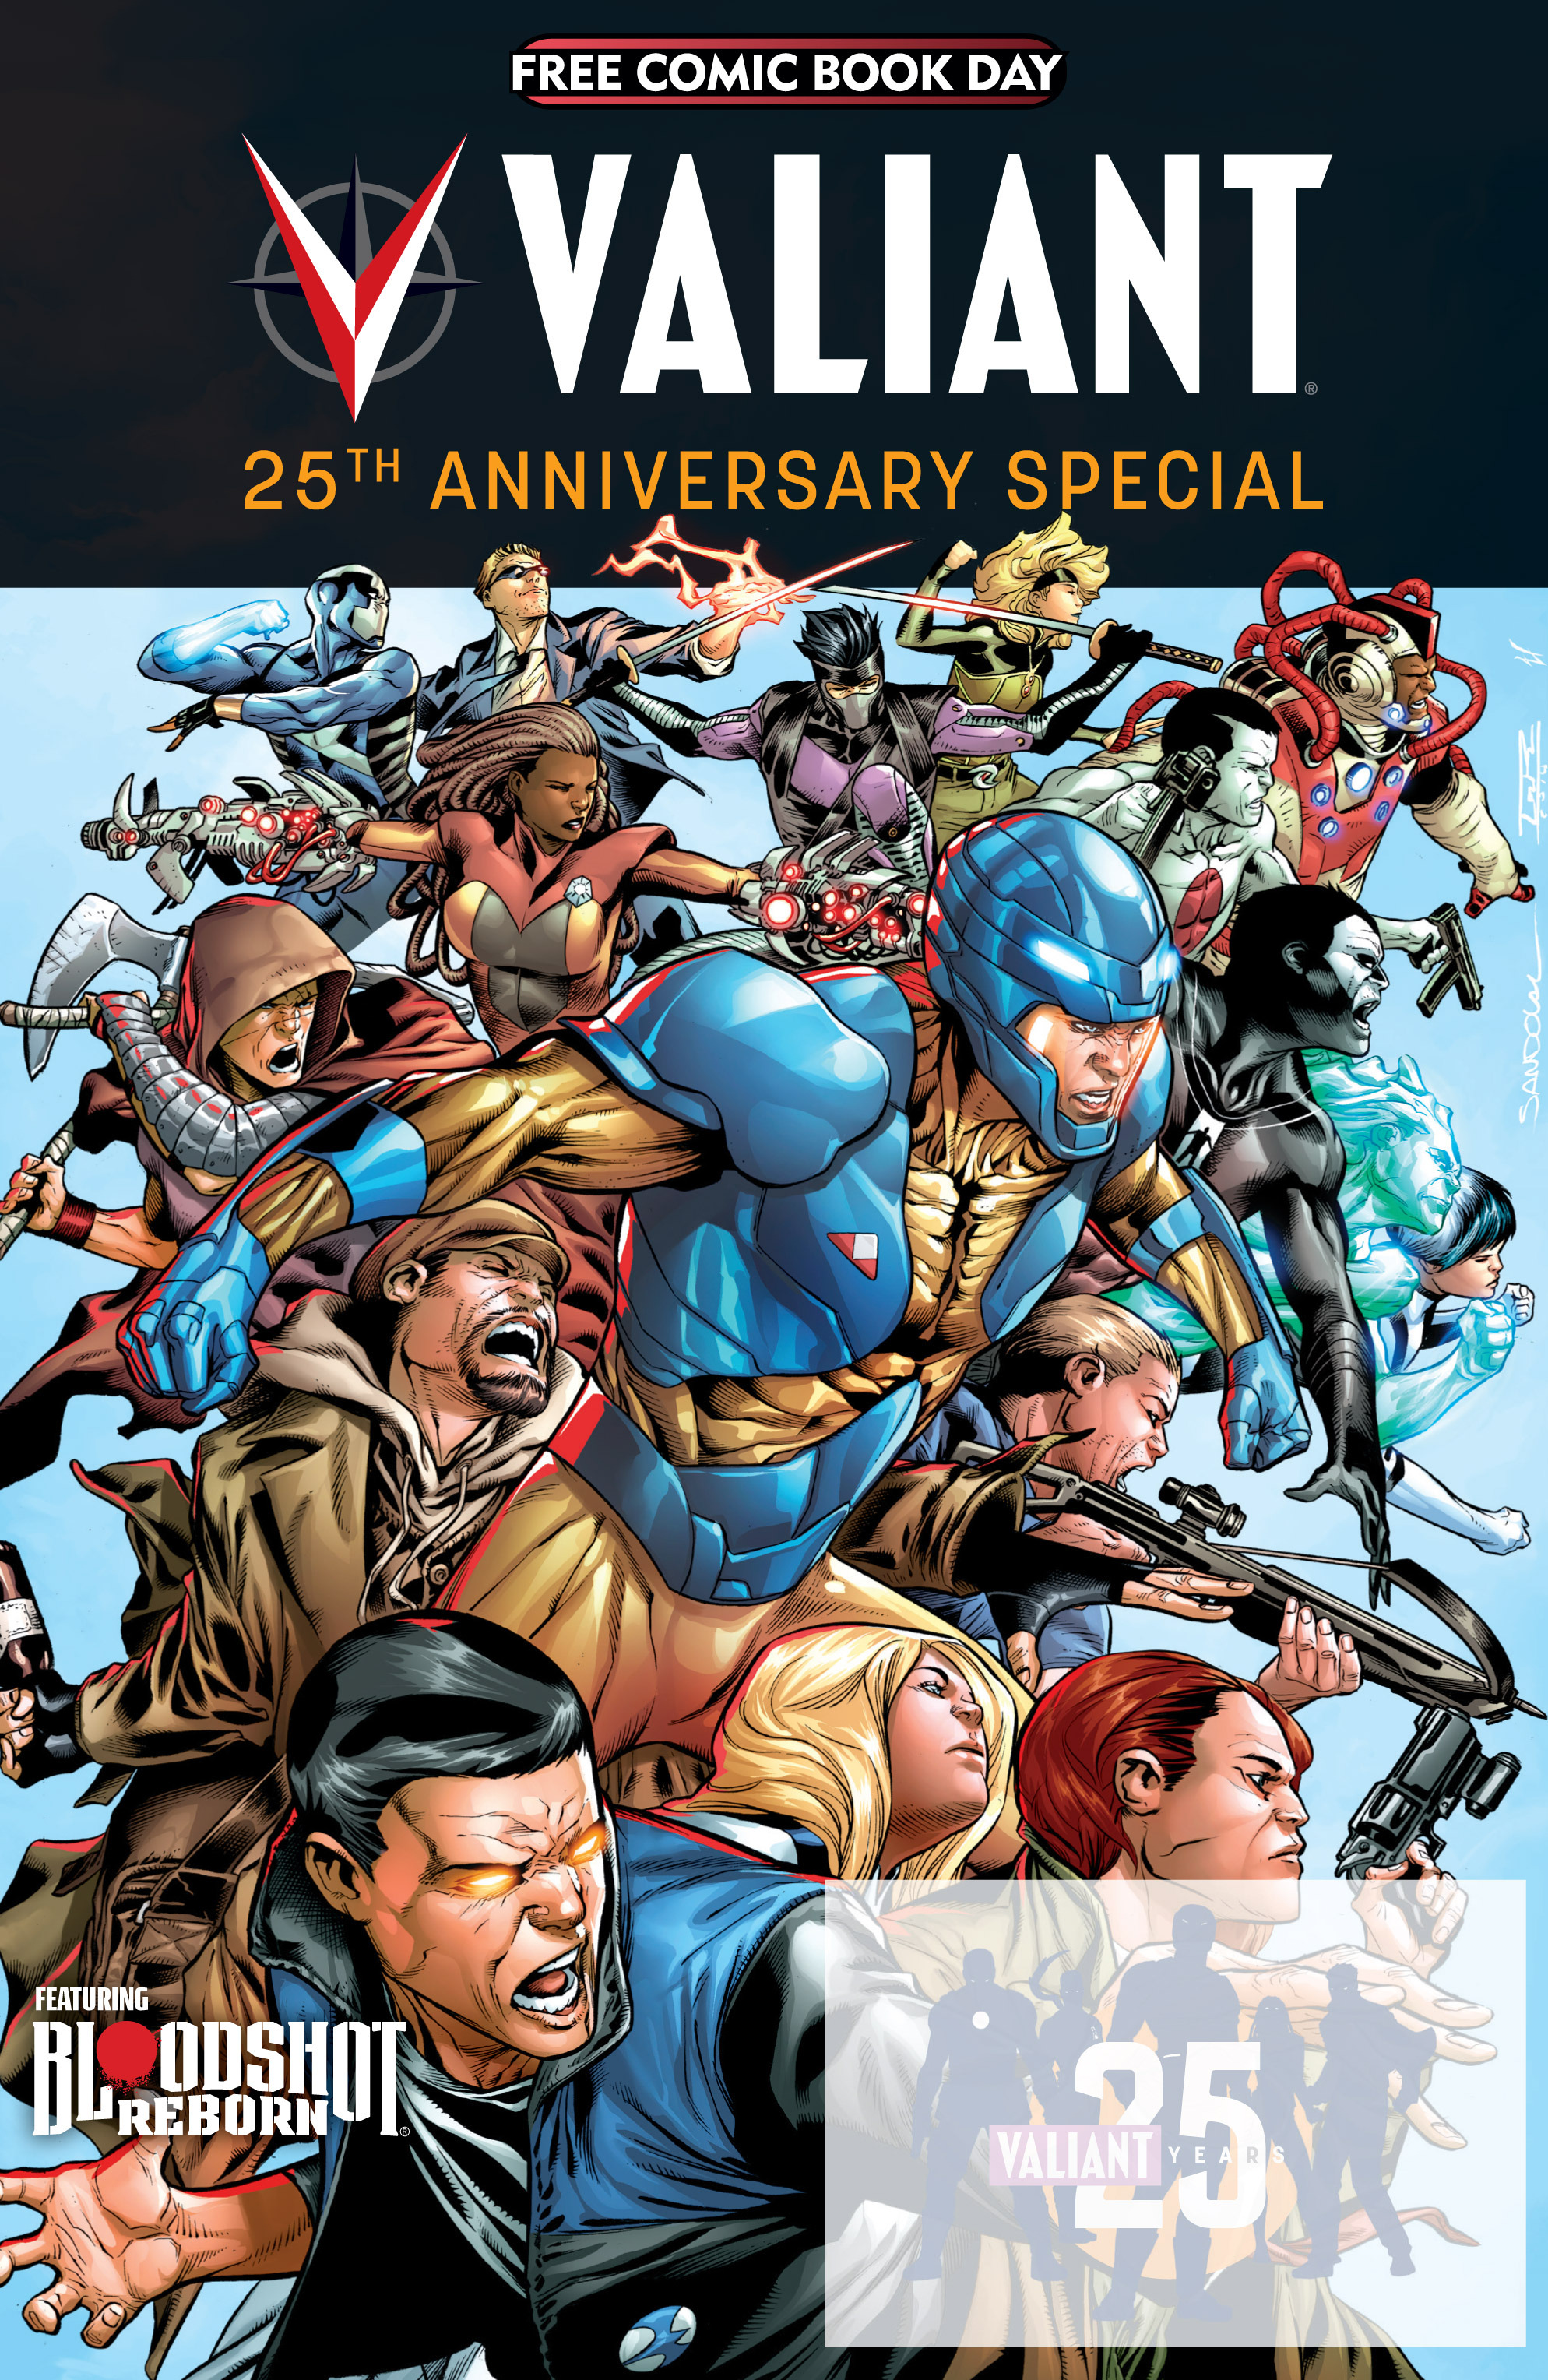 Read online Free Comic Book Day 2015 comic -  Issue # Valiant 25th Anniversary Special - 1